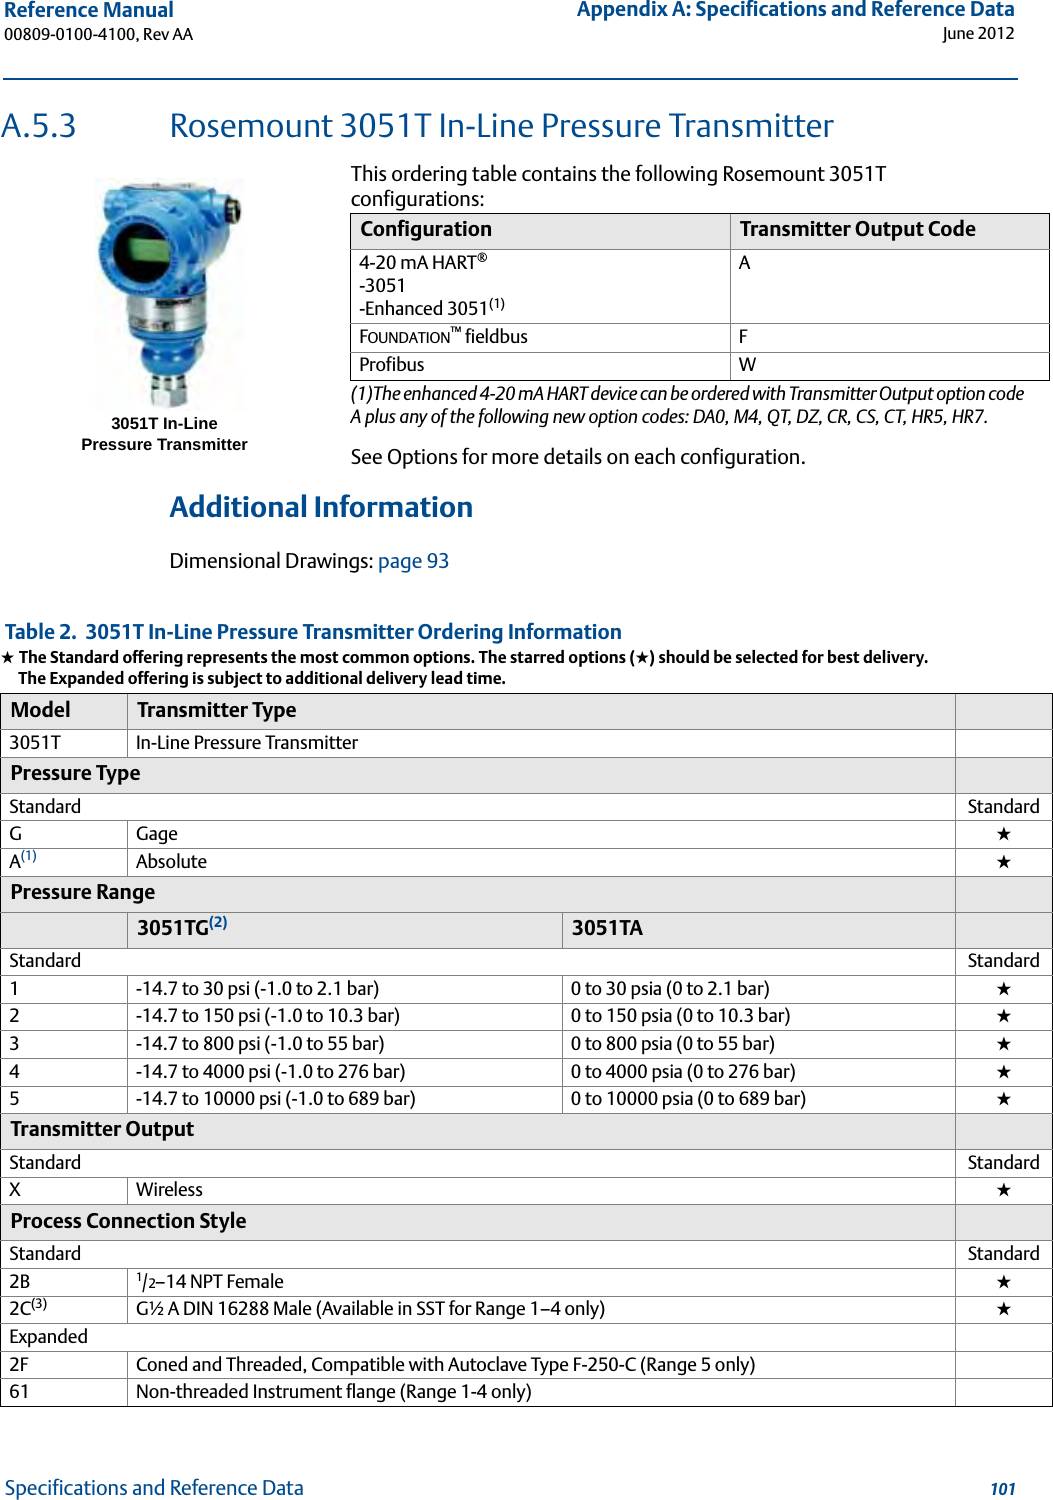 101Reference Manual 00809-0100-4100, Rev AAAppendix A: Specifications and Reference DataJune 2012Specifications and Reference DataA.5.3 Rosemount 3051T In-Line Pressure TransmitterThis ordering table contains the following Rosemount 3051T configurations:See Options for more details on each configuration. Additional InformationDimensional Drawings: page 93Configuration Transmitter Output Code4-20 mA HART®-3051-Enhanced 3051(1)(1)The enhanced 4-20 mA HART device can be ordered with Transmitter Output option code A plus any of the following new option codes: DA0, M4, QT, DZ, CR, CS, CT, HR5, HR7.AFOUNDATION™ fieldbus FProfibus W Table 2.  3051T In-Line Pressure Transmitter Ordering Information★ The Standard offering represents the most common options. The starred options (★) should be selected for best delivery.__The Expanded offering is subject to additional delivery lead time.Model Transmitter Type3051T In-Line Pressure TransmitterPressure TypeStandard StandardGGage ★A(1) Absolute ★Pressure Range3051TG(2) 3051TAStandard Standard1-14.7 to 30 psi (-1.0 to 2.1 bar) 0 to 30 psia (0 to 2.1 bar) ★2-14.7 to 150 psi (-1.0 to 10.3 bar) 0 to 150 psia (0 to 10.3 bar) ★3-14.7 to 800 psi (-1.0 to 55 bar) 0 to 800 psia (0 to 55 bar) ★4-14.7 to 4000 psi (-1.0 to 276 bar) 0 to 4000 psia (0 to 276 bar) ★5-14.7 to 10000 psi (-1.0 to 689 bar) 0 to 10000 psia (0 to 689 bar) ★Transmitter OutputStandard StandardXWireless ★Process Connection StyleStandard Standard2B 1/2–14 NPT Female ★2C(3) G½ A DIN 16288 Male (Available in SST for Range 1–4 only) ★Expanded2F Coned and Threaded, Compatible with Autoclave Type F-250-C (Range 5 only)61 Non-threaded Instrument flange (Range 1-4 only)3051T In-LinePressure Transmitter